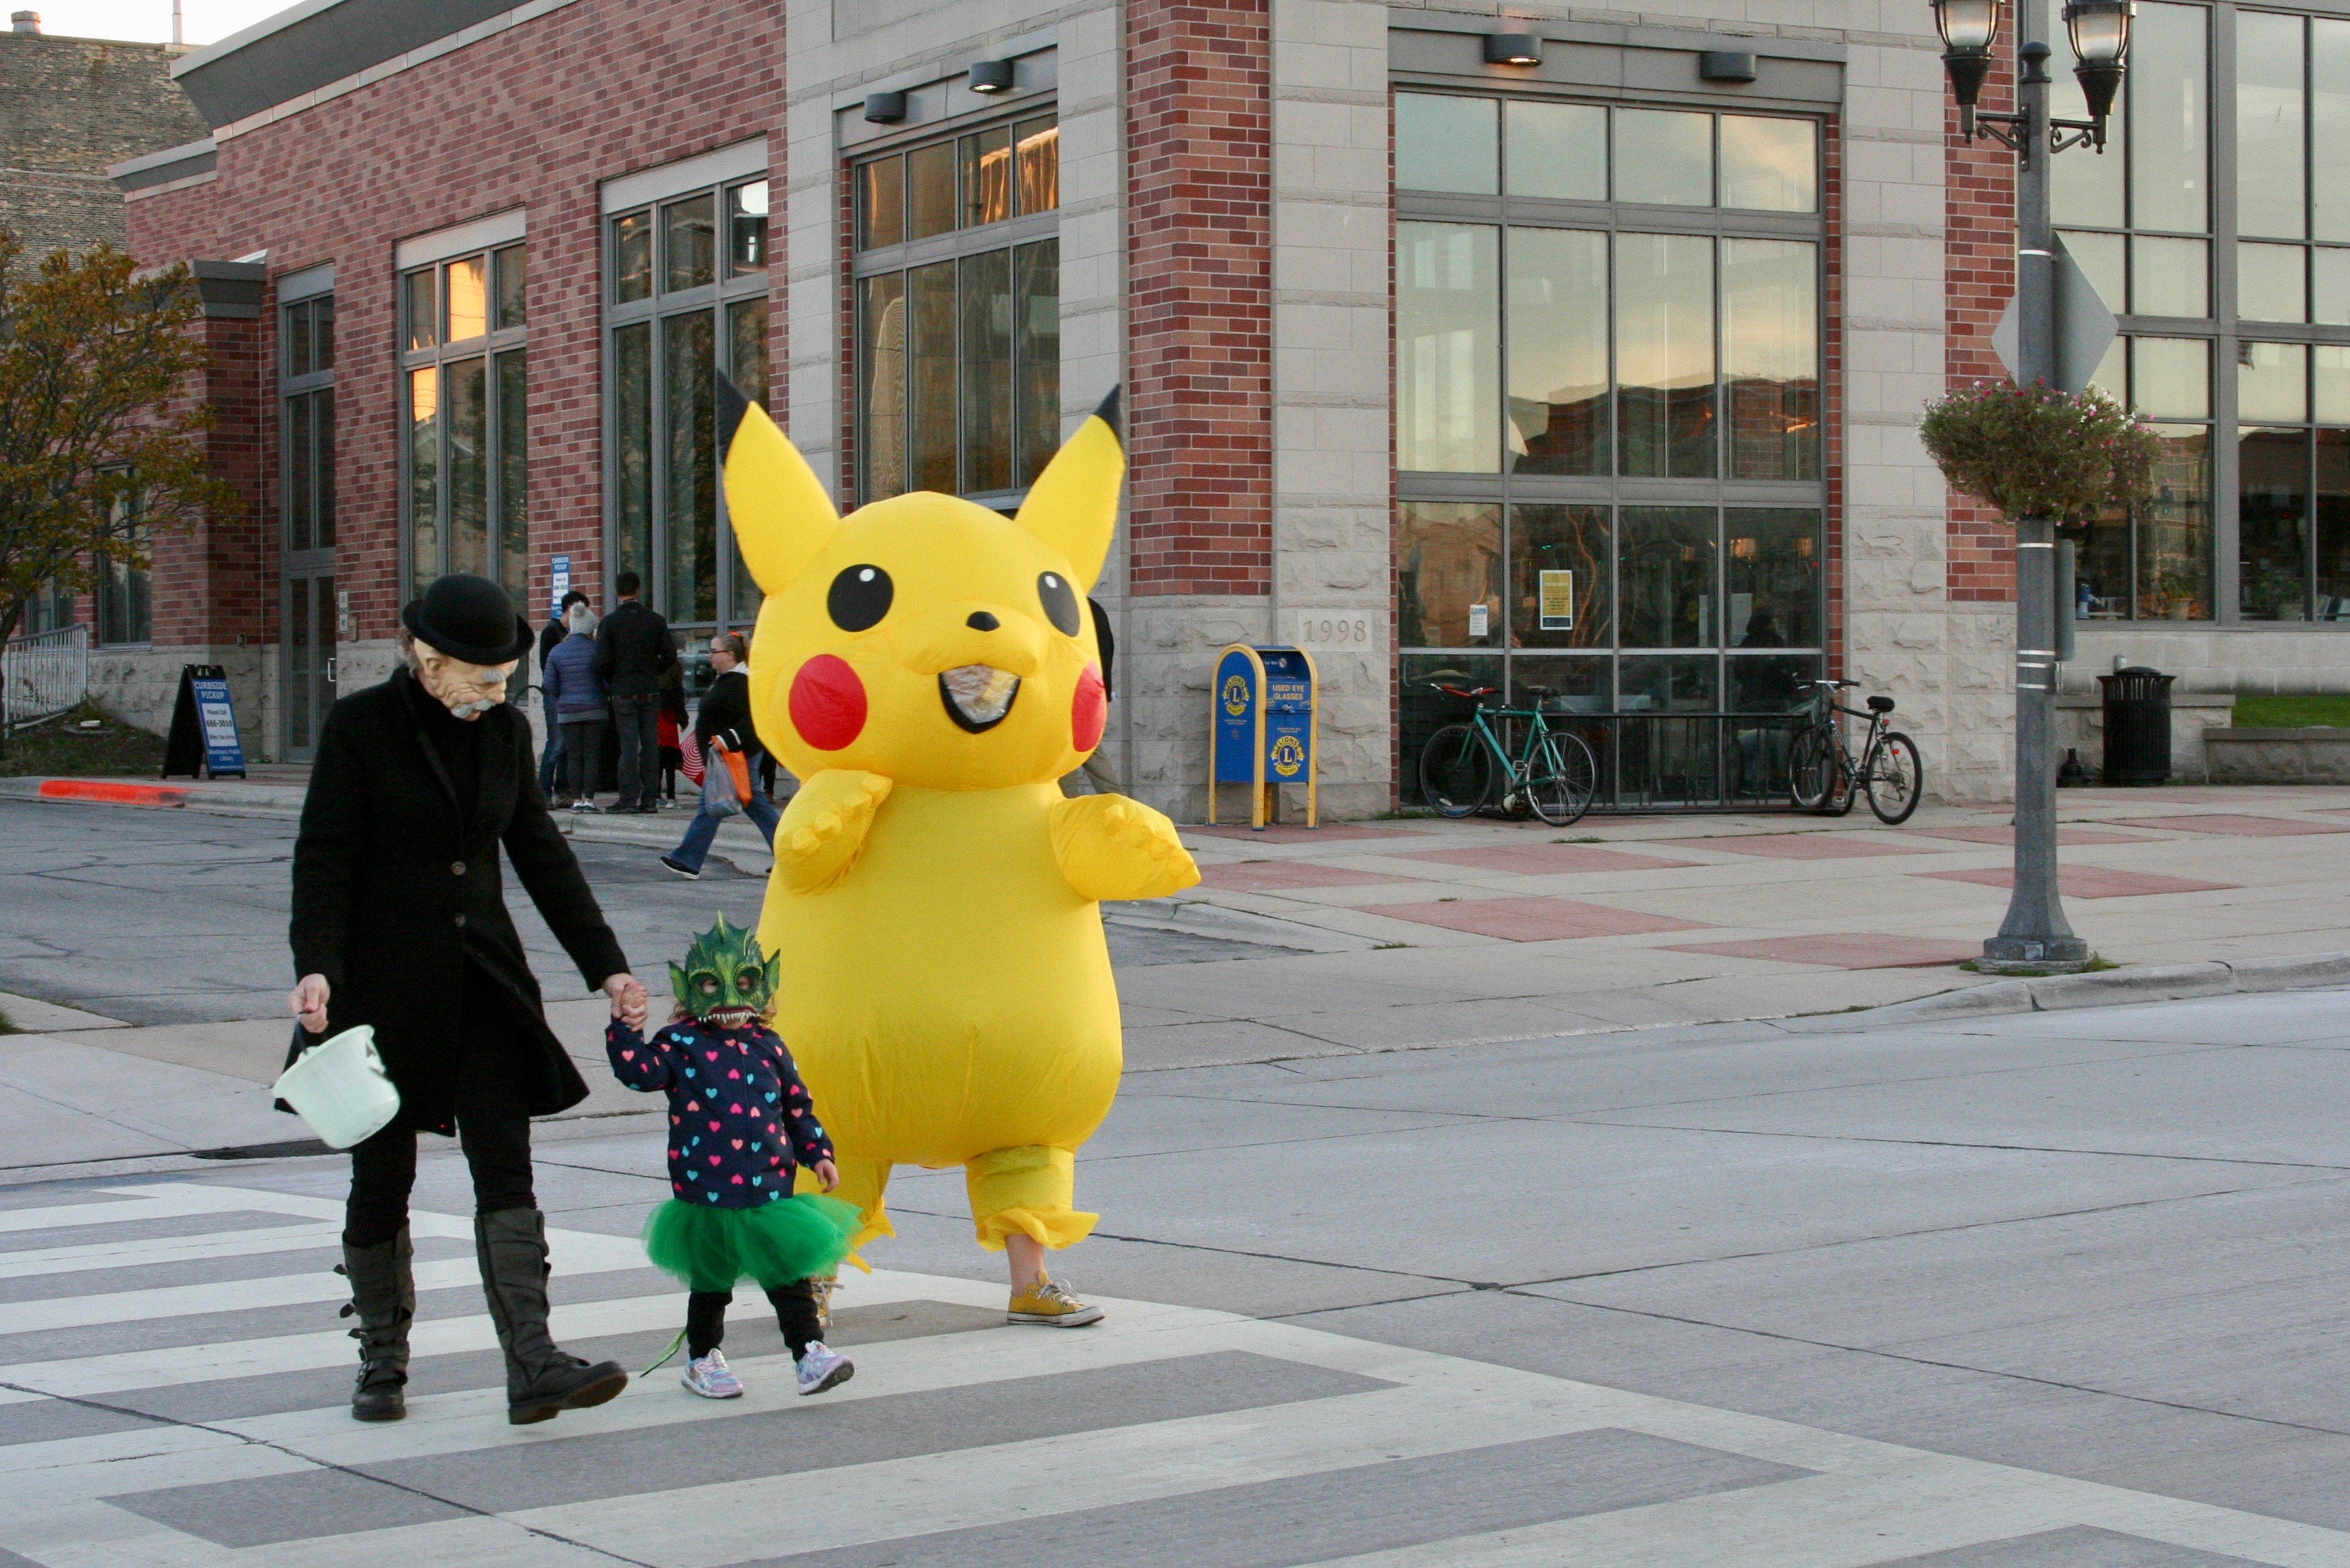 Person wearing inflatable Pikachu costume walks beside adult and child